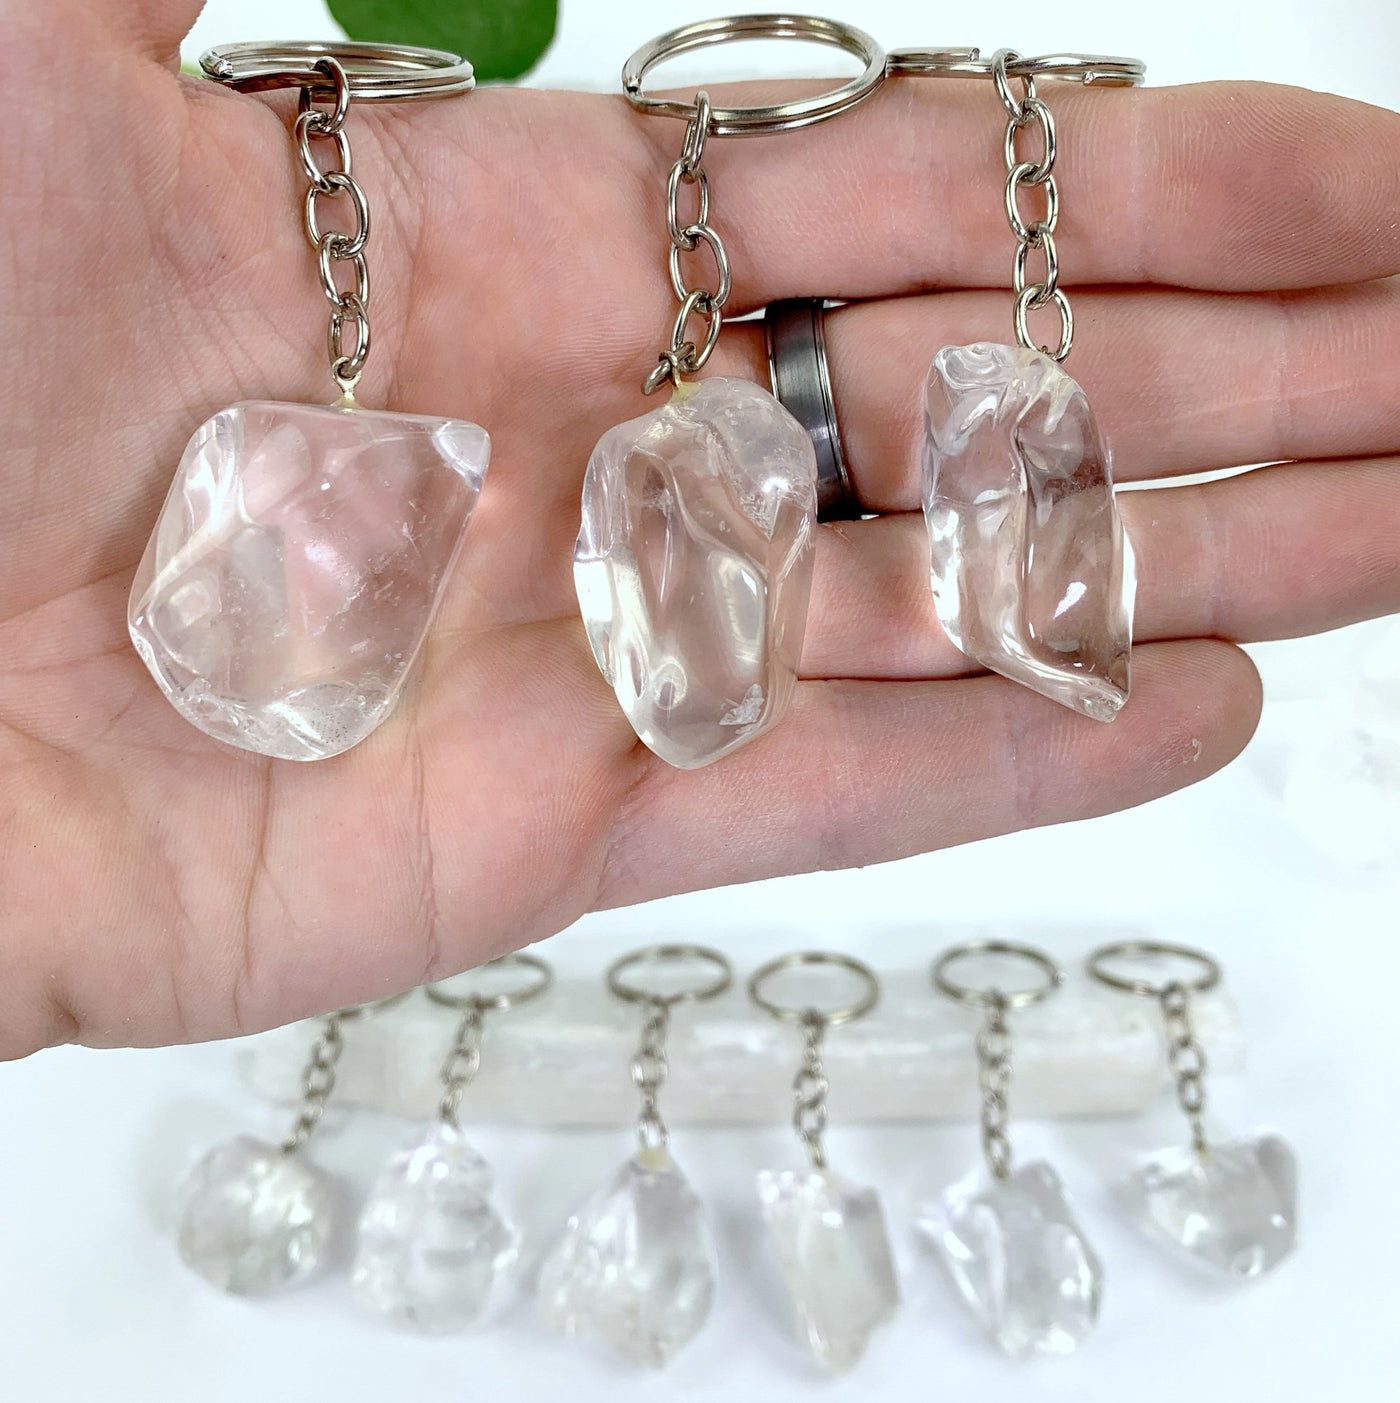 Crystal Ice Cube Keychains with silver links and hoop ring in hand for size reference